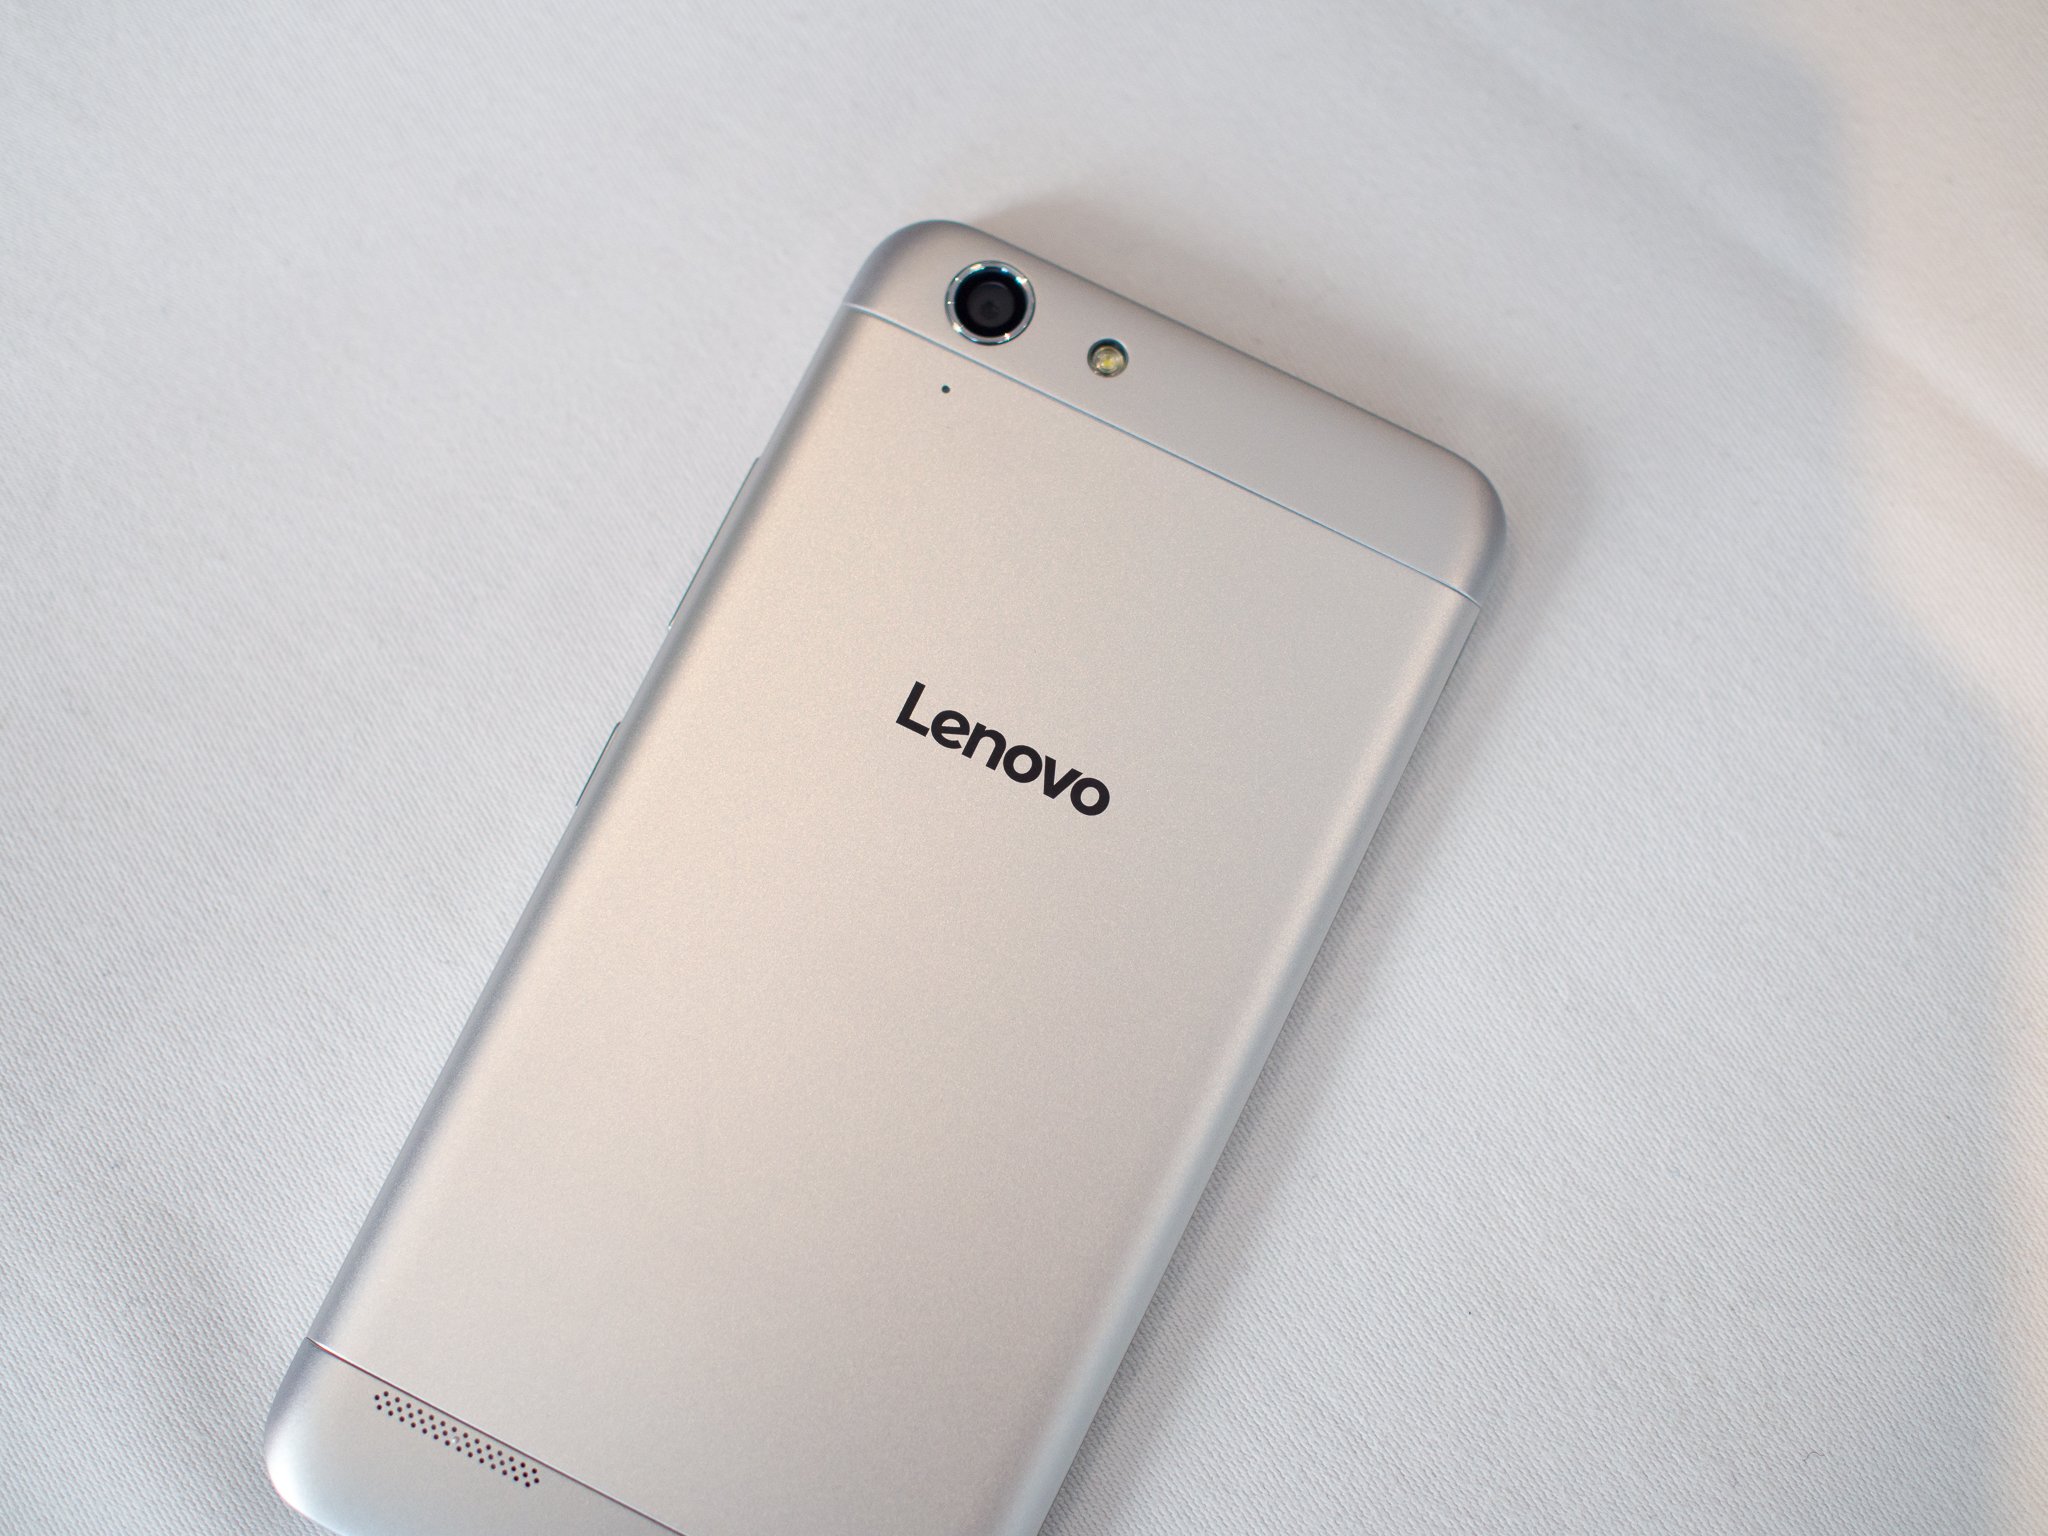 Lenovo launches Vibe K5 and K5 Plus budget Android smartphones